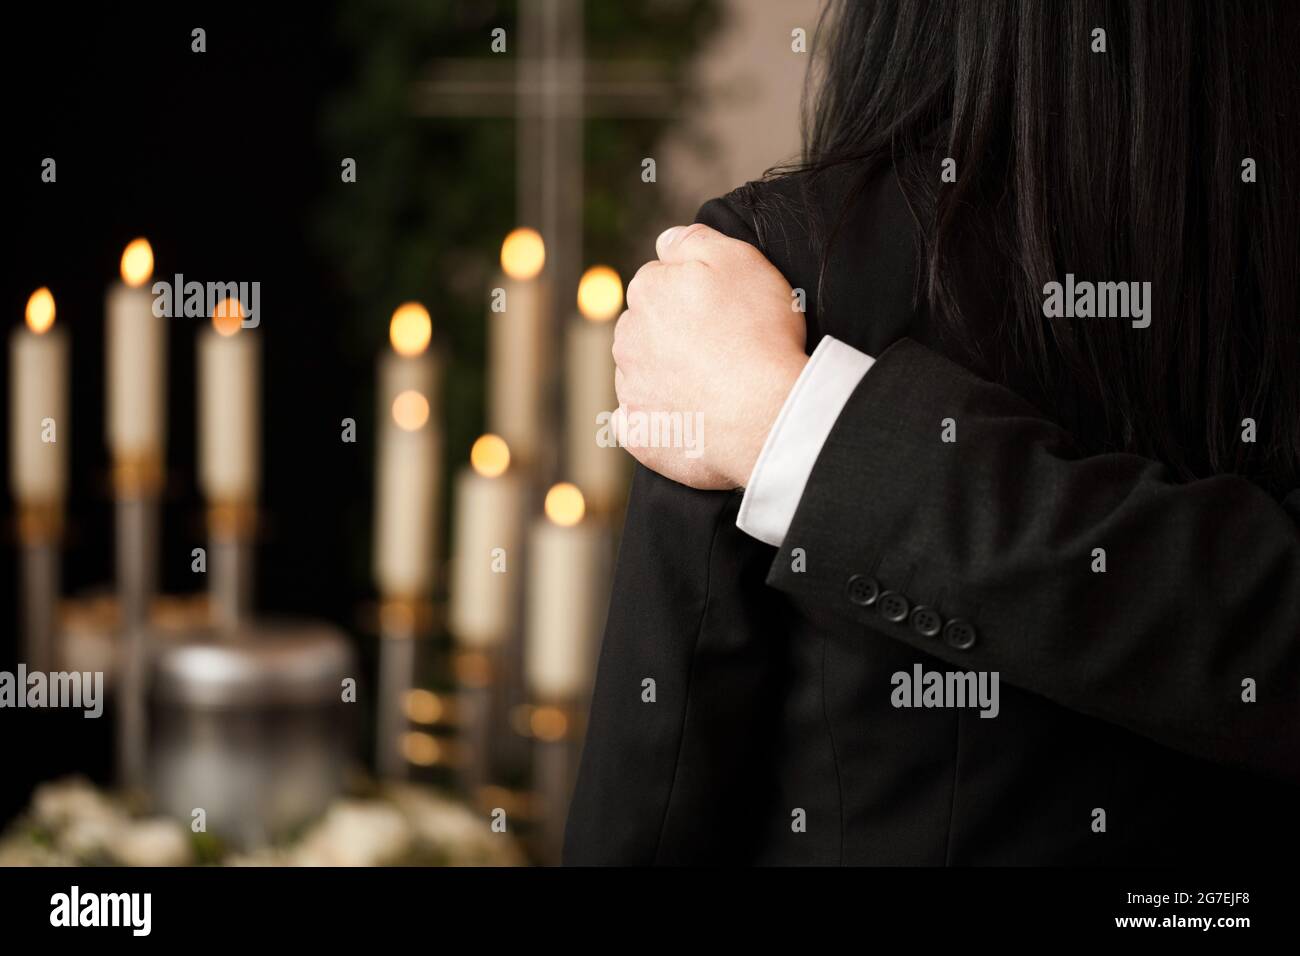 Religion, death and dolor  - couple at funeral consoling each other in view of the loss Stock Photo